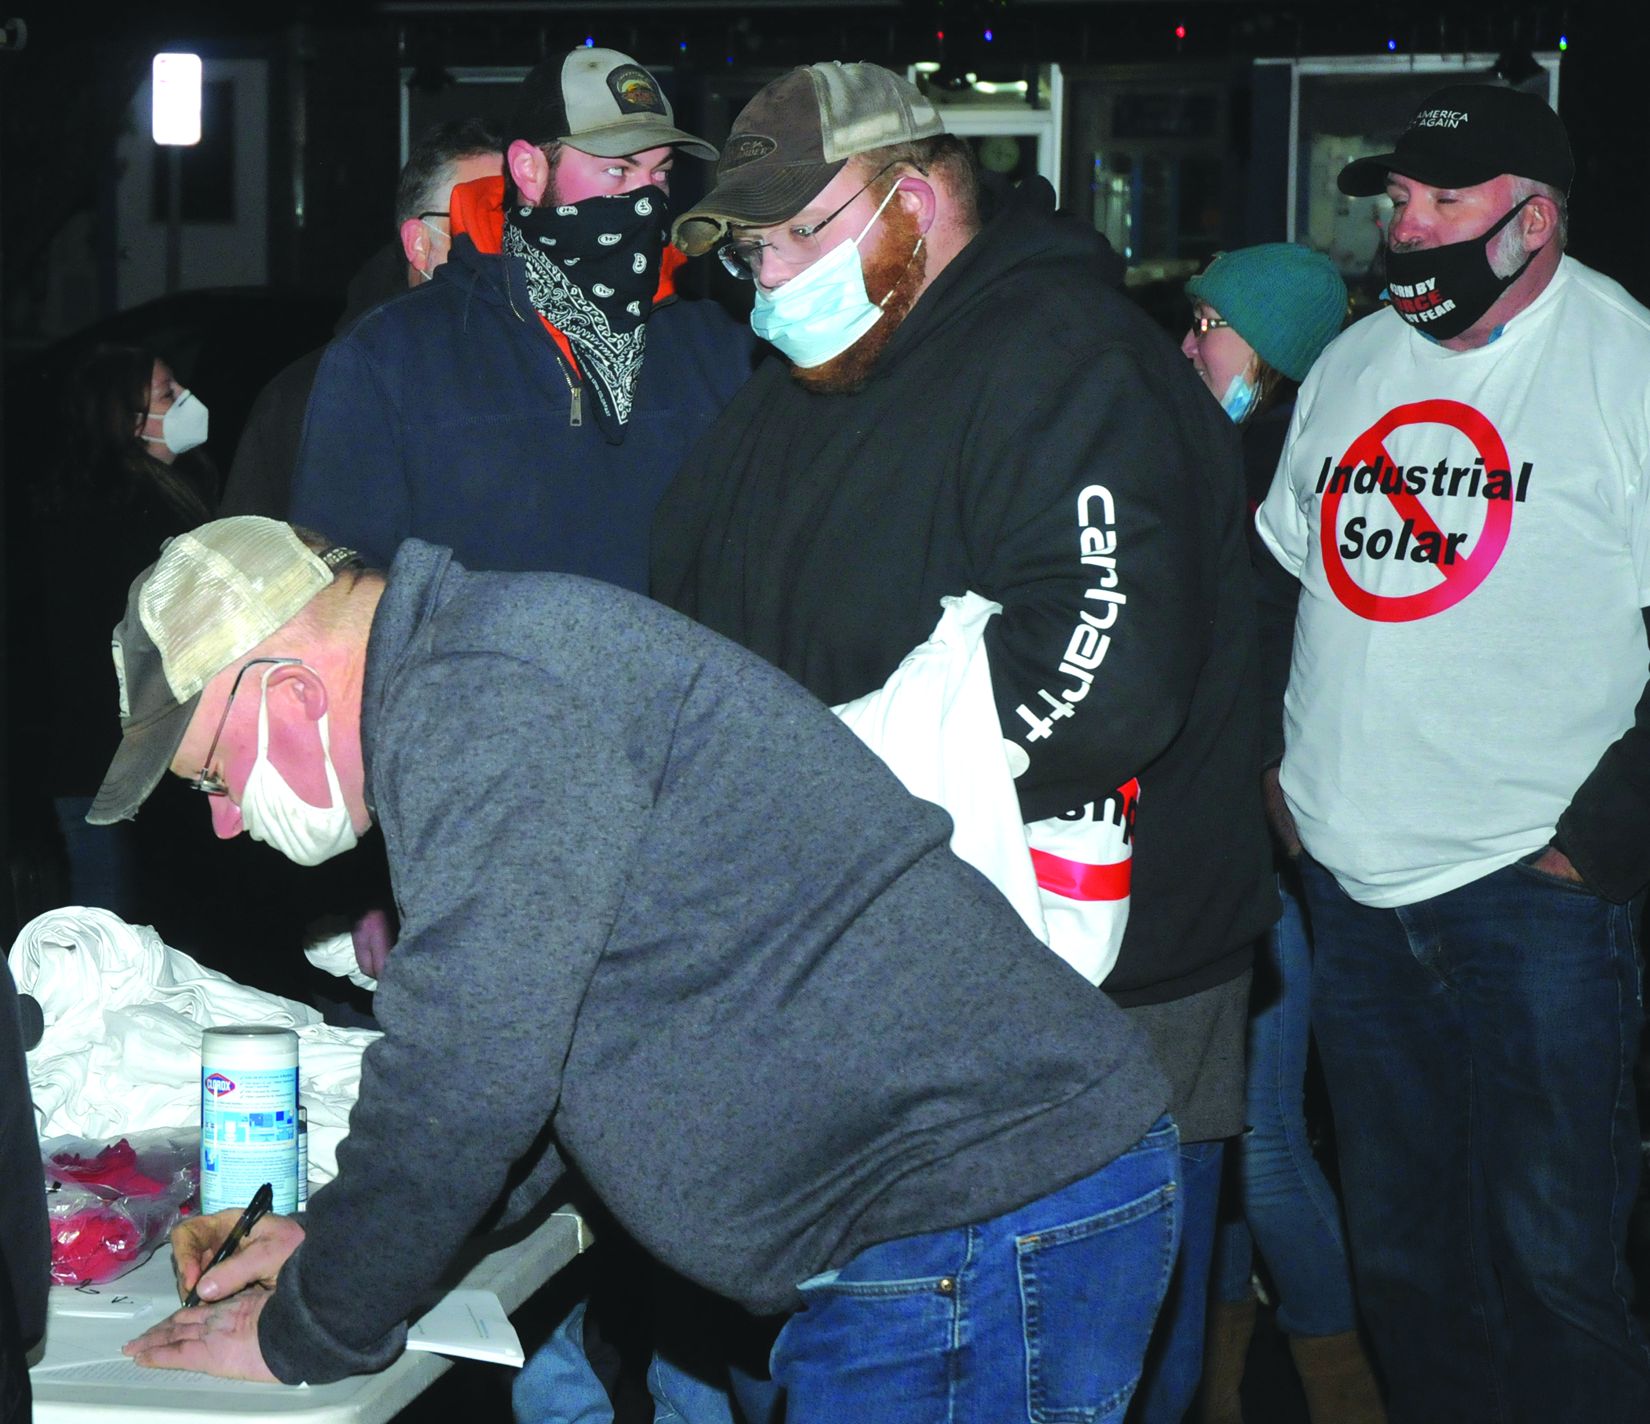 Schoharie rallies against solar project